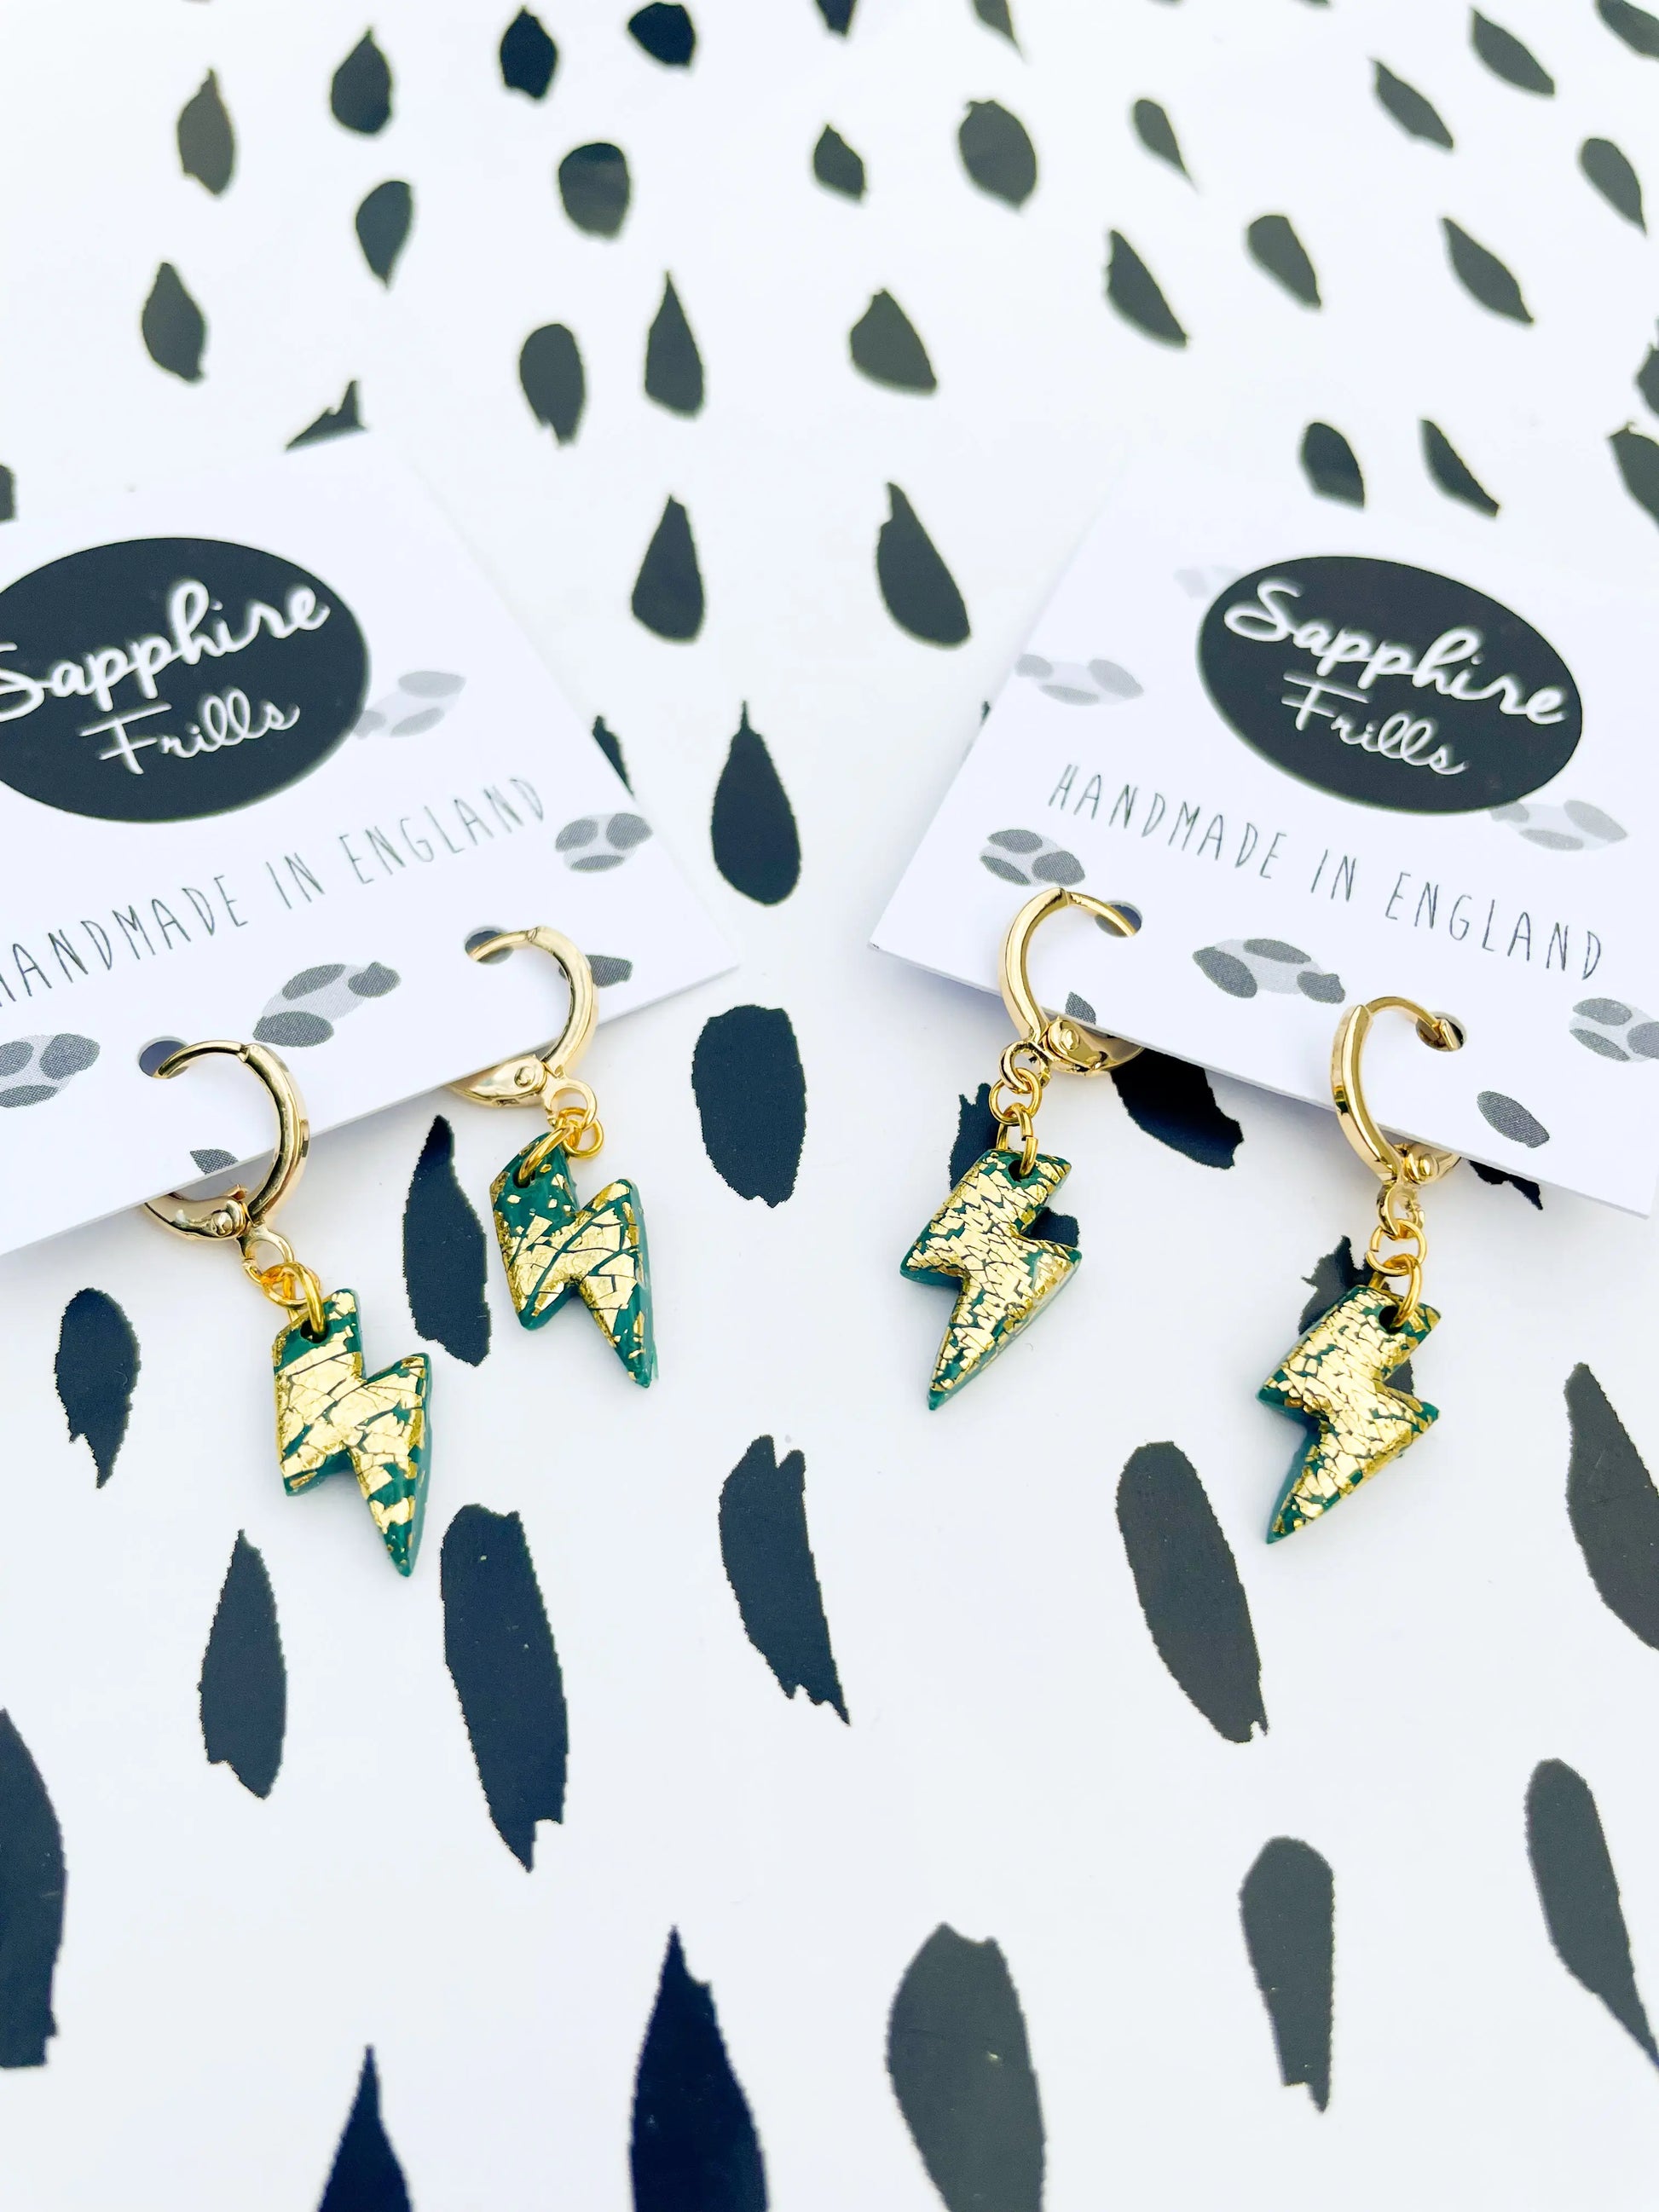 Mini Teal and Gold Lightning Bolt Stud Earrings from Sapphire Frills